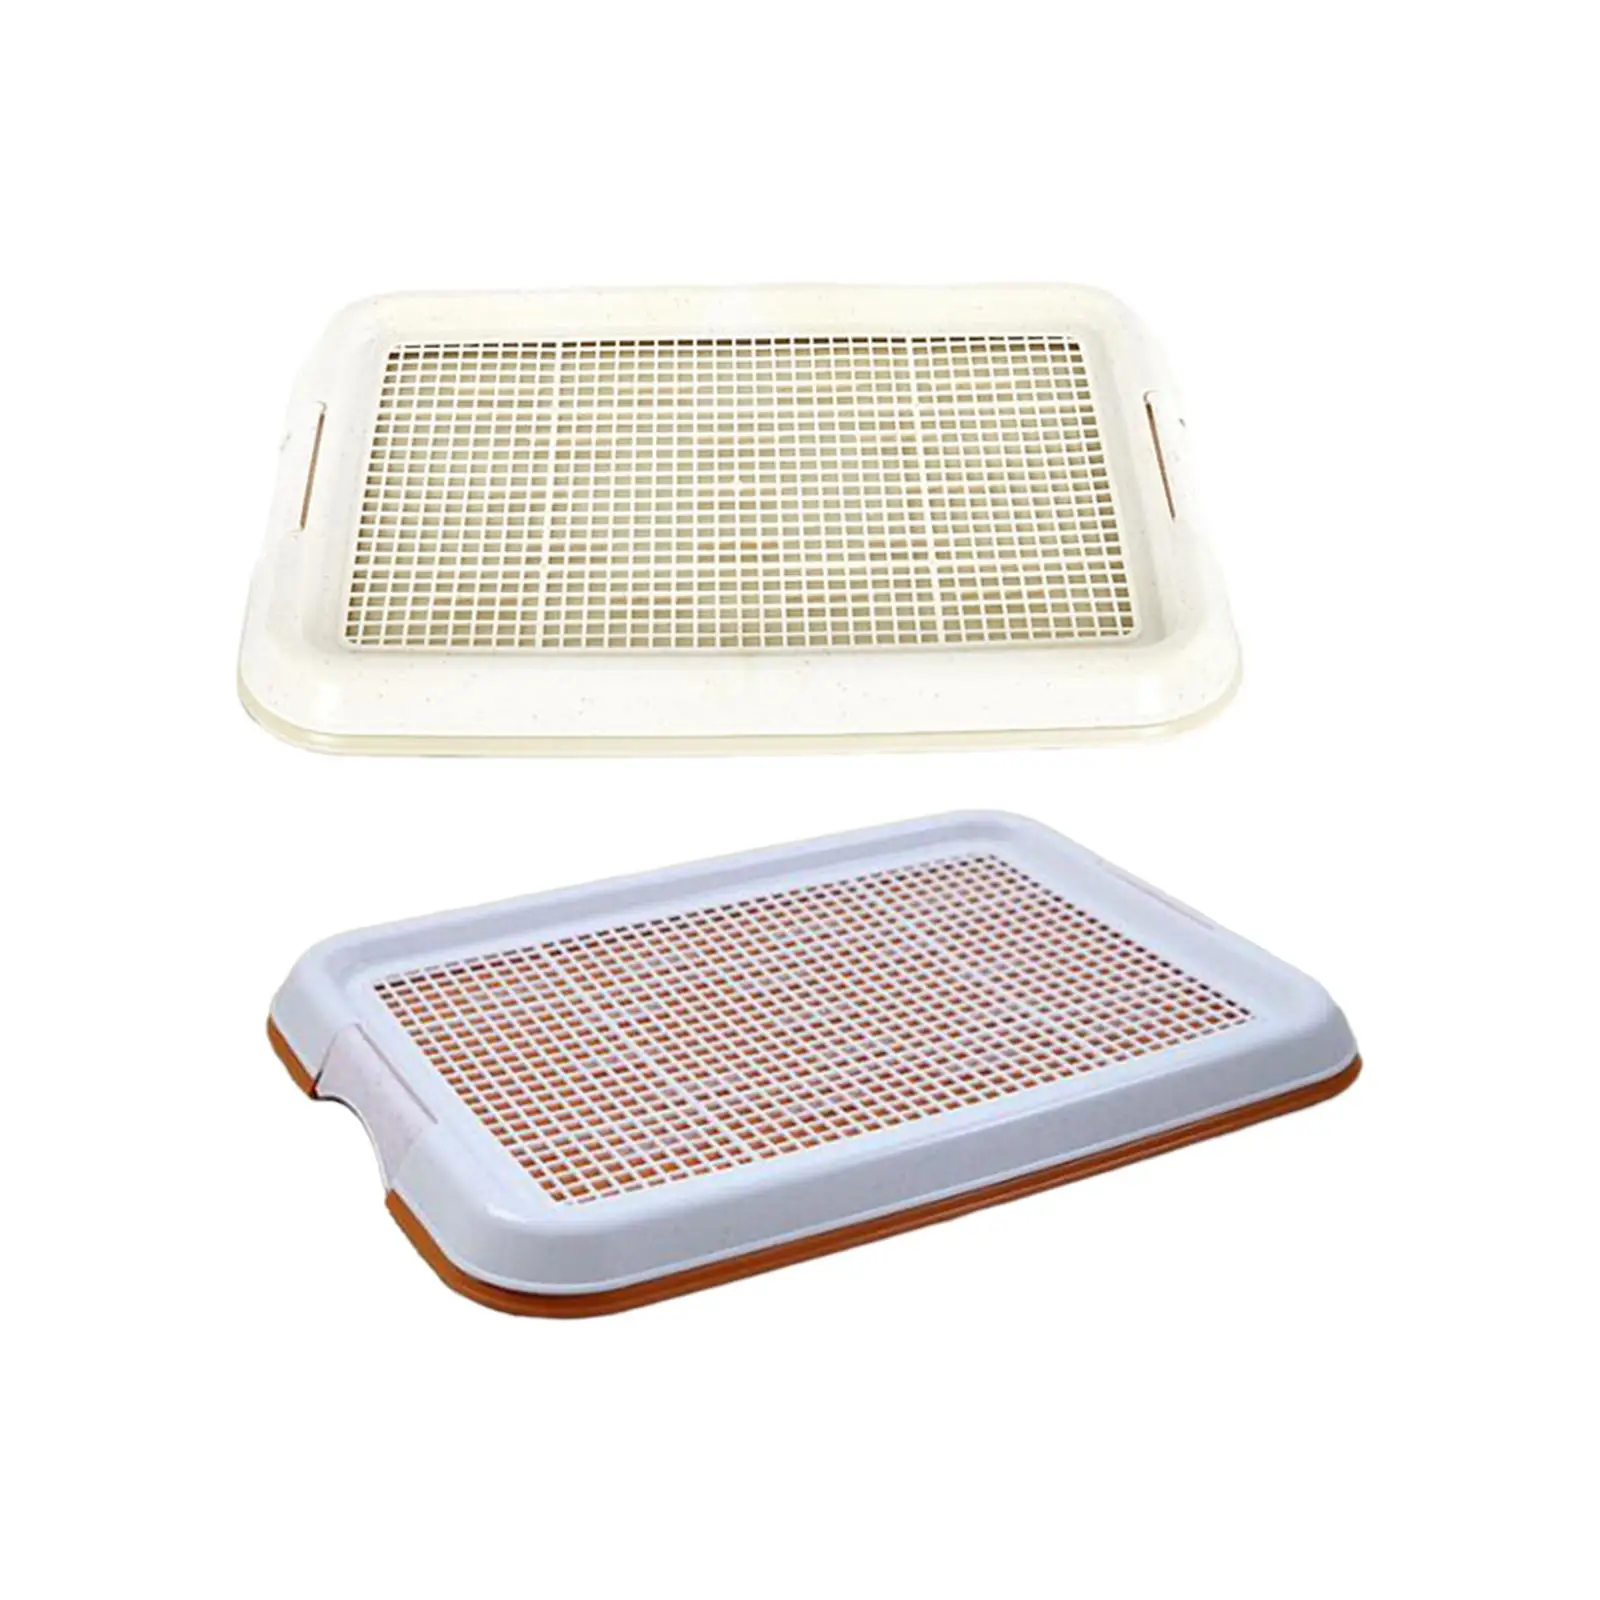 Dog Potty Toilet Training Tray Potty Trainer Easy to Clean 18.5x13.8 inch Dog